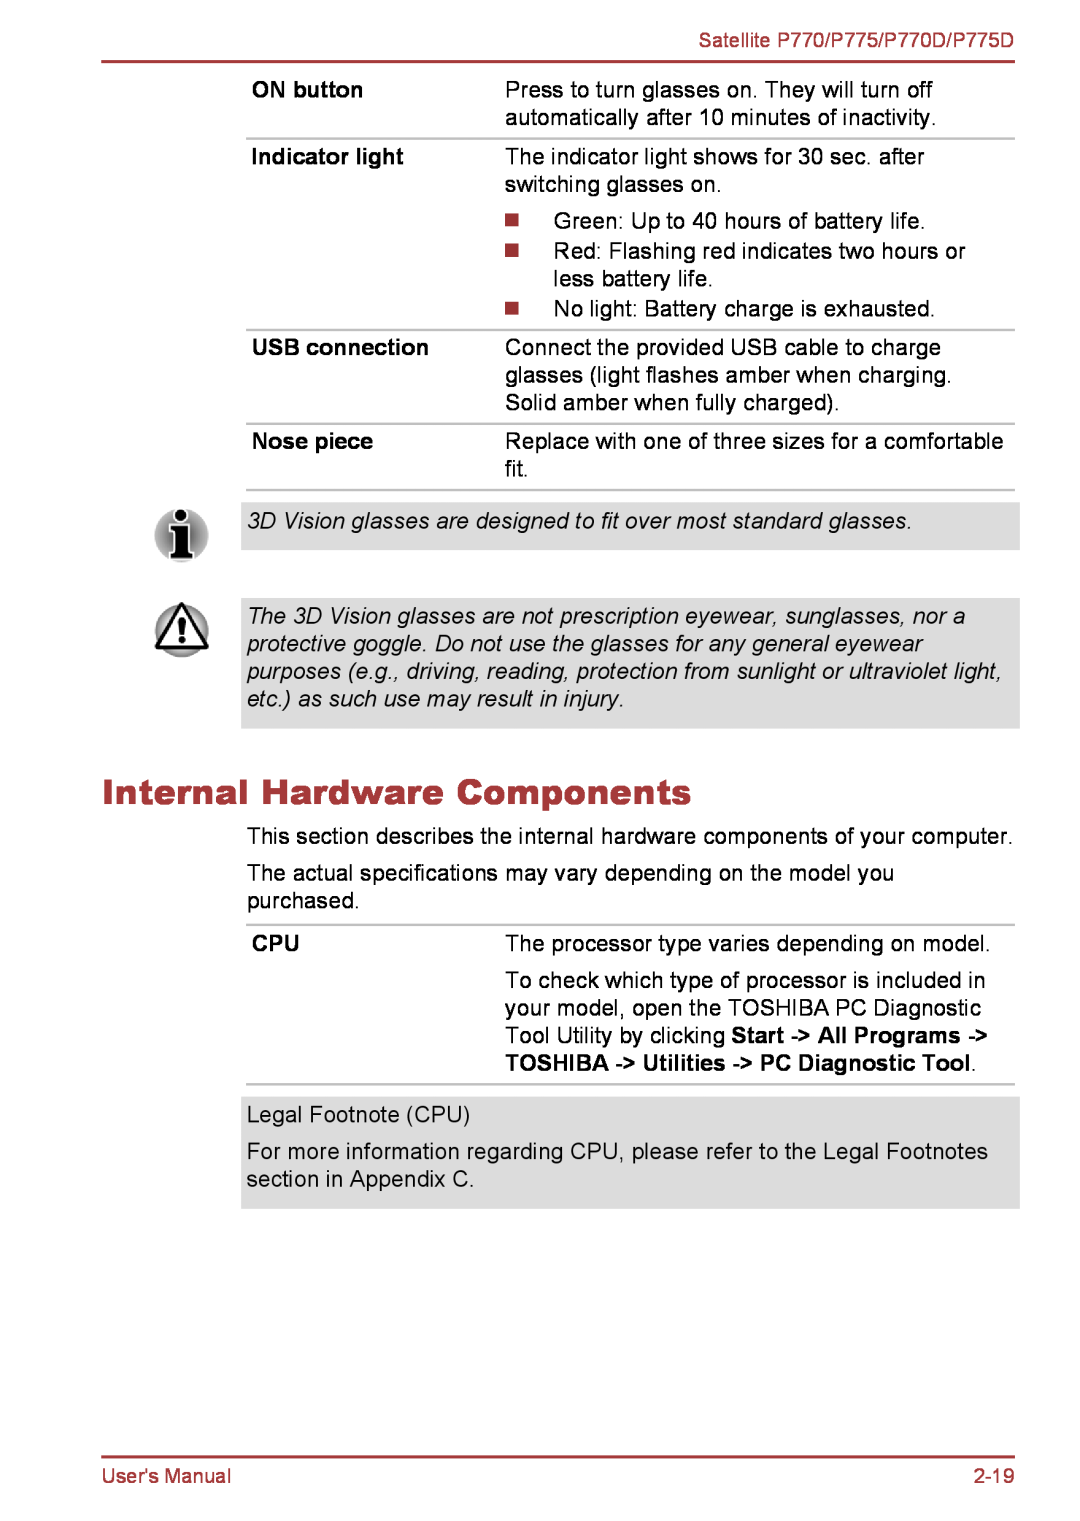 Toshiba P770 user manual Internal Hardware Components, ON button, Indicator light, USB connection, Nose piece 